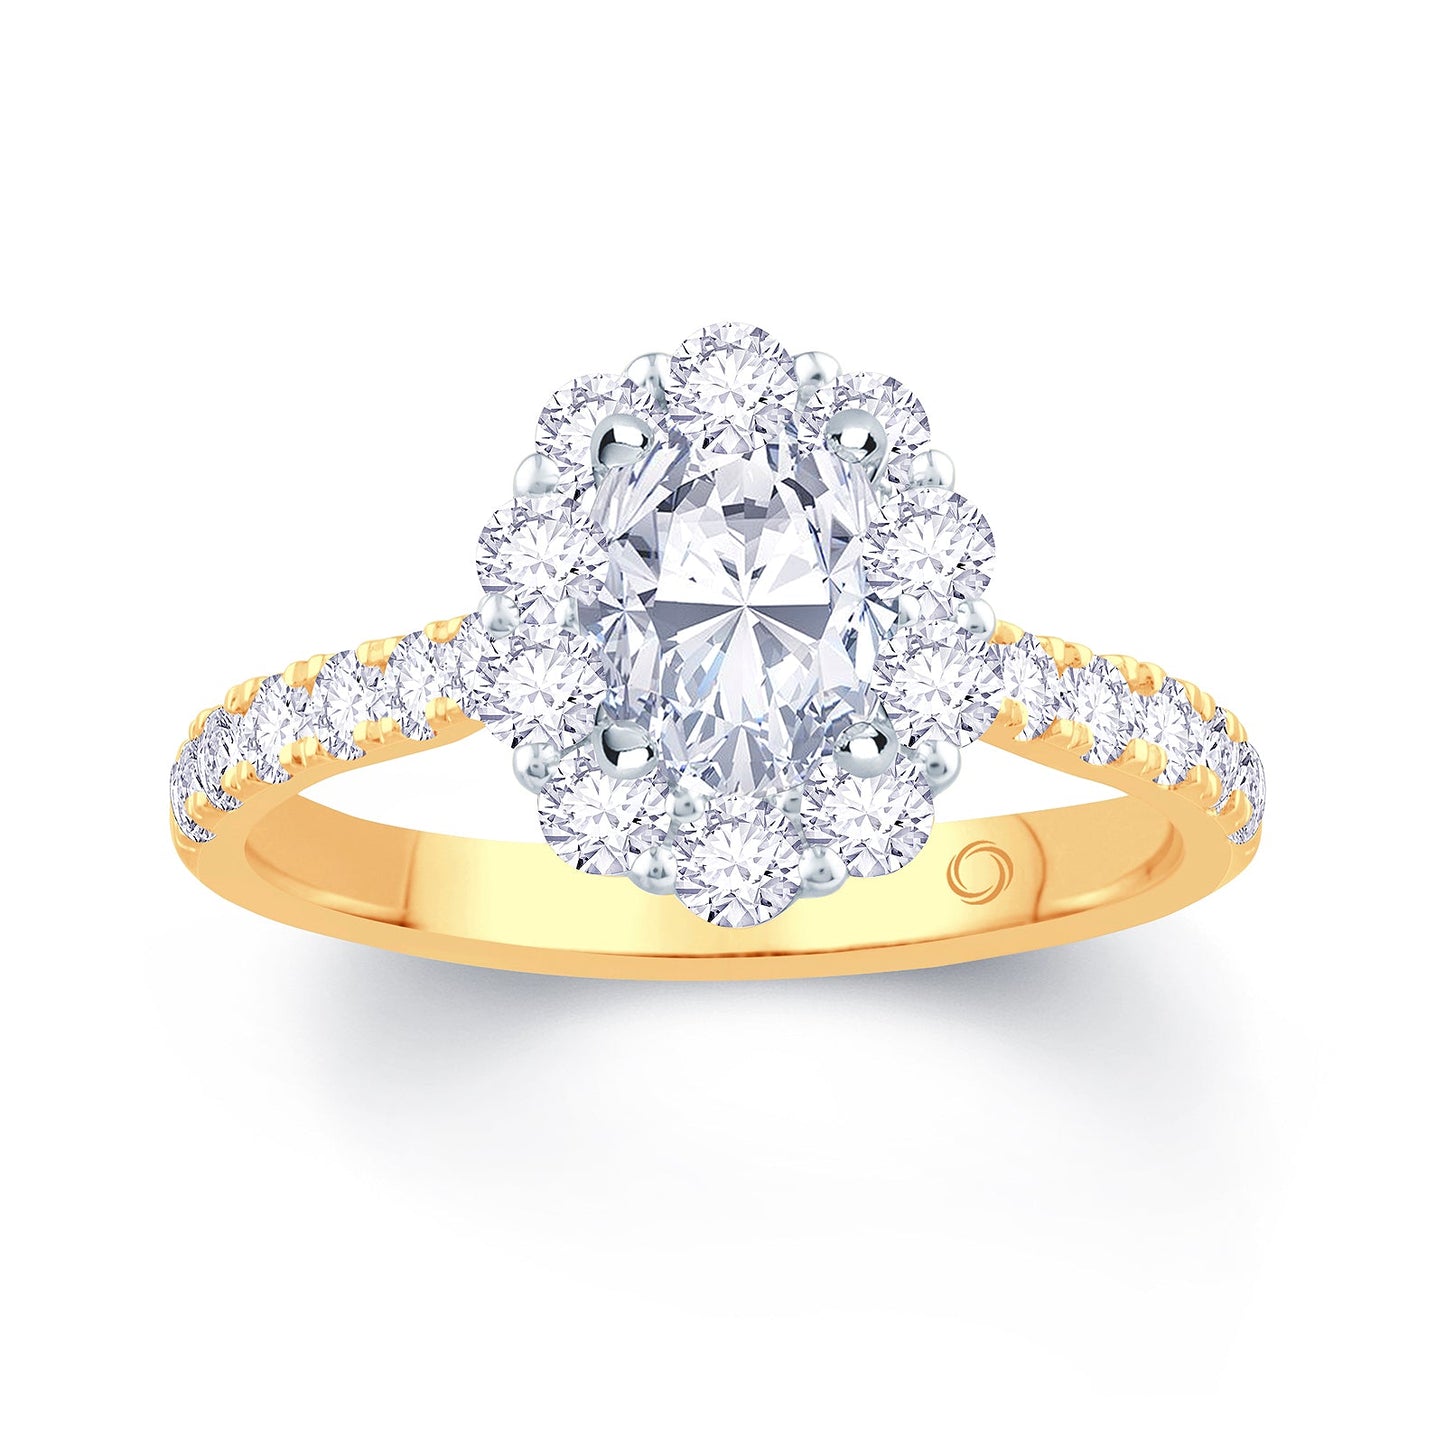 18ct Yellow Gold Oval, Halo & Shoulder Set Diamond Ring, 1.31ct